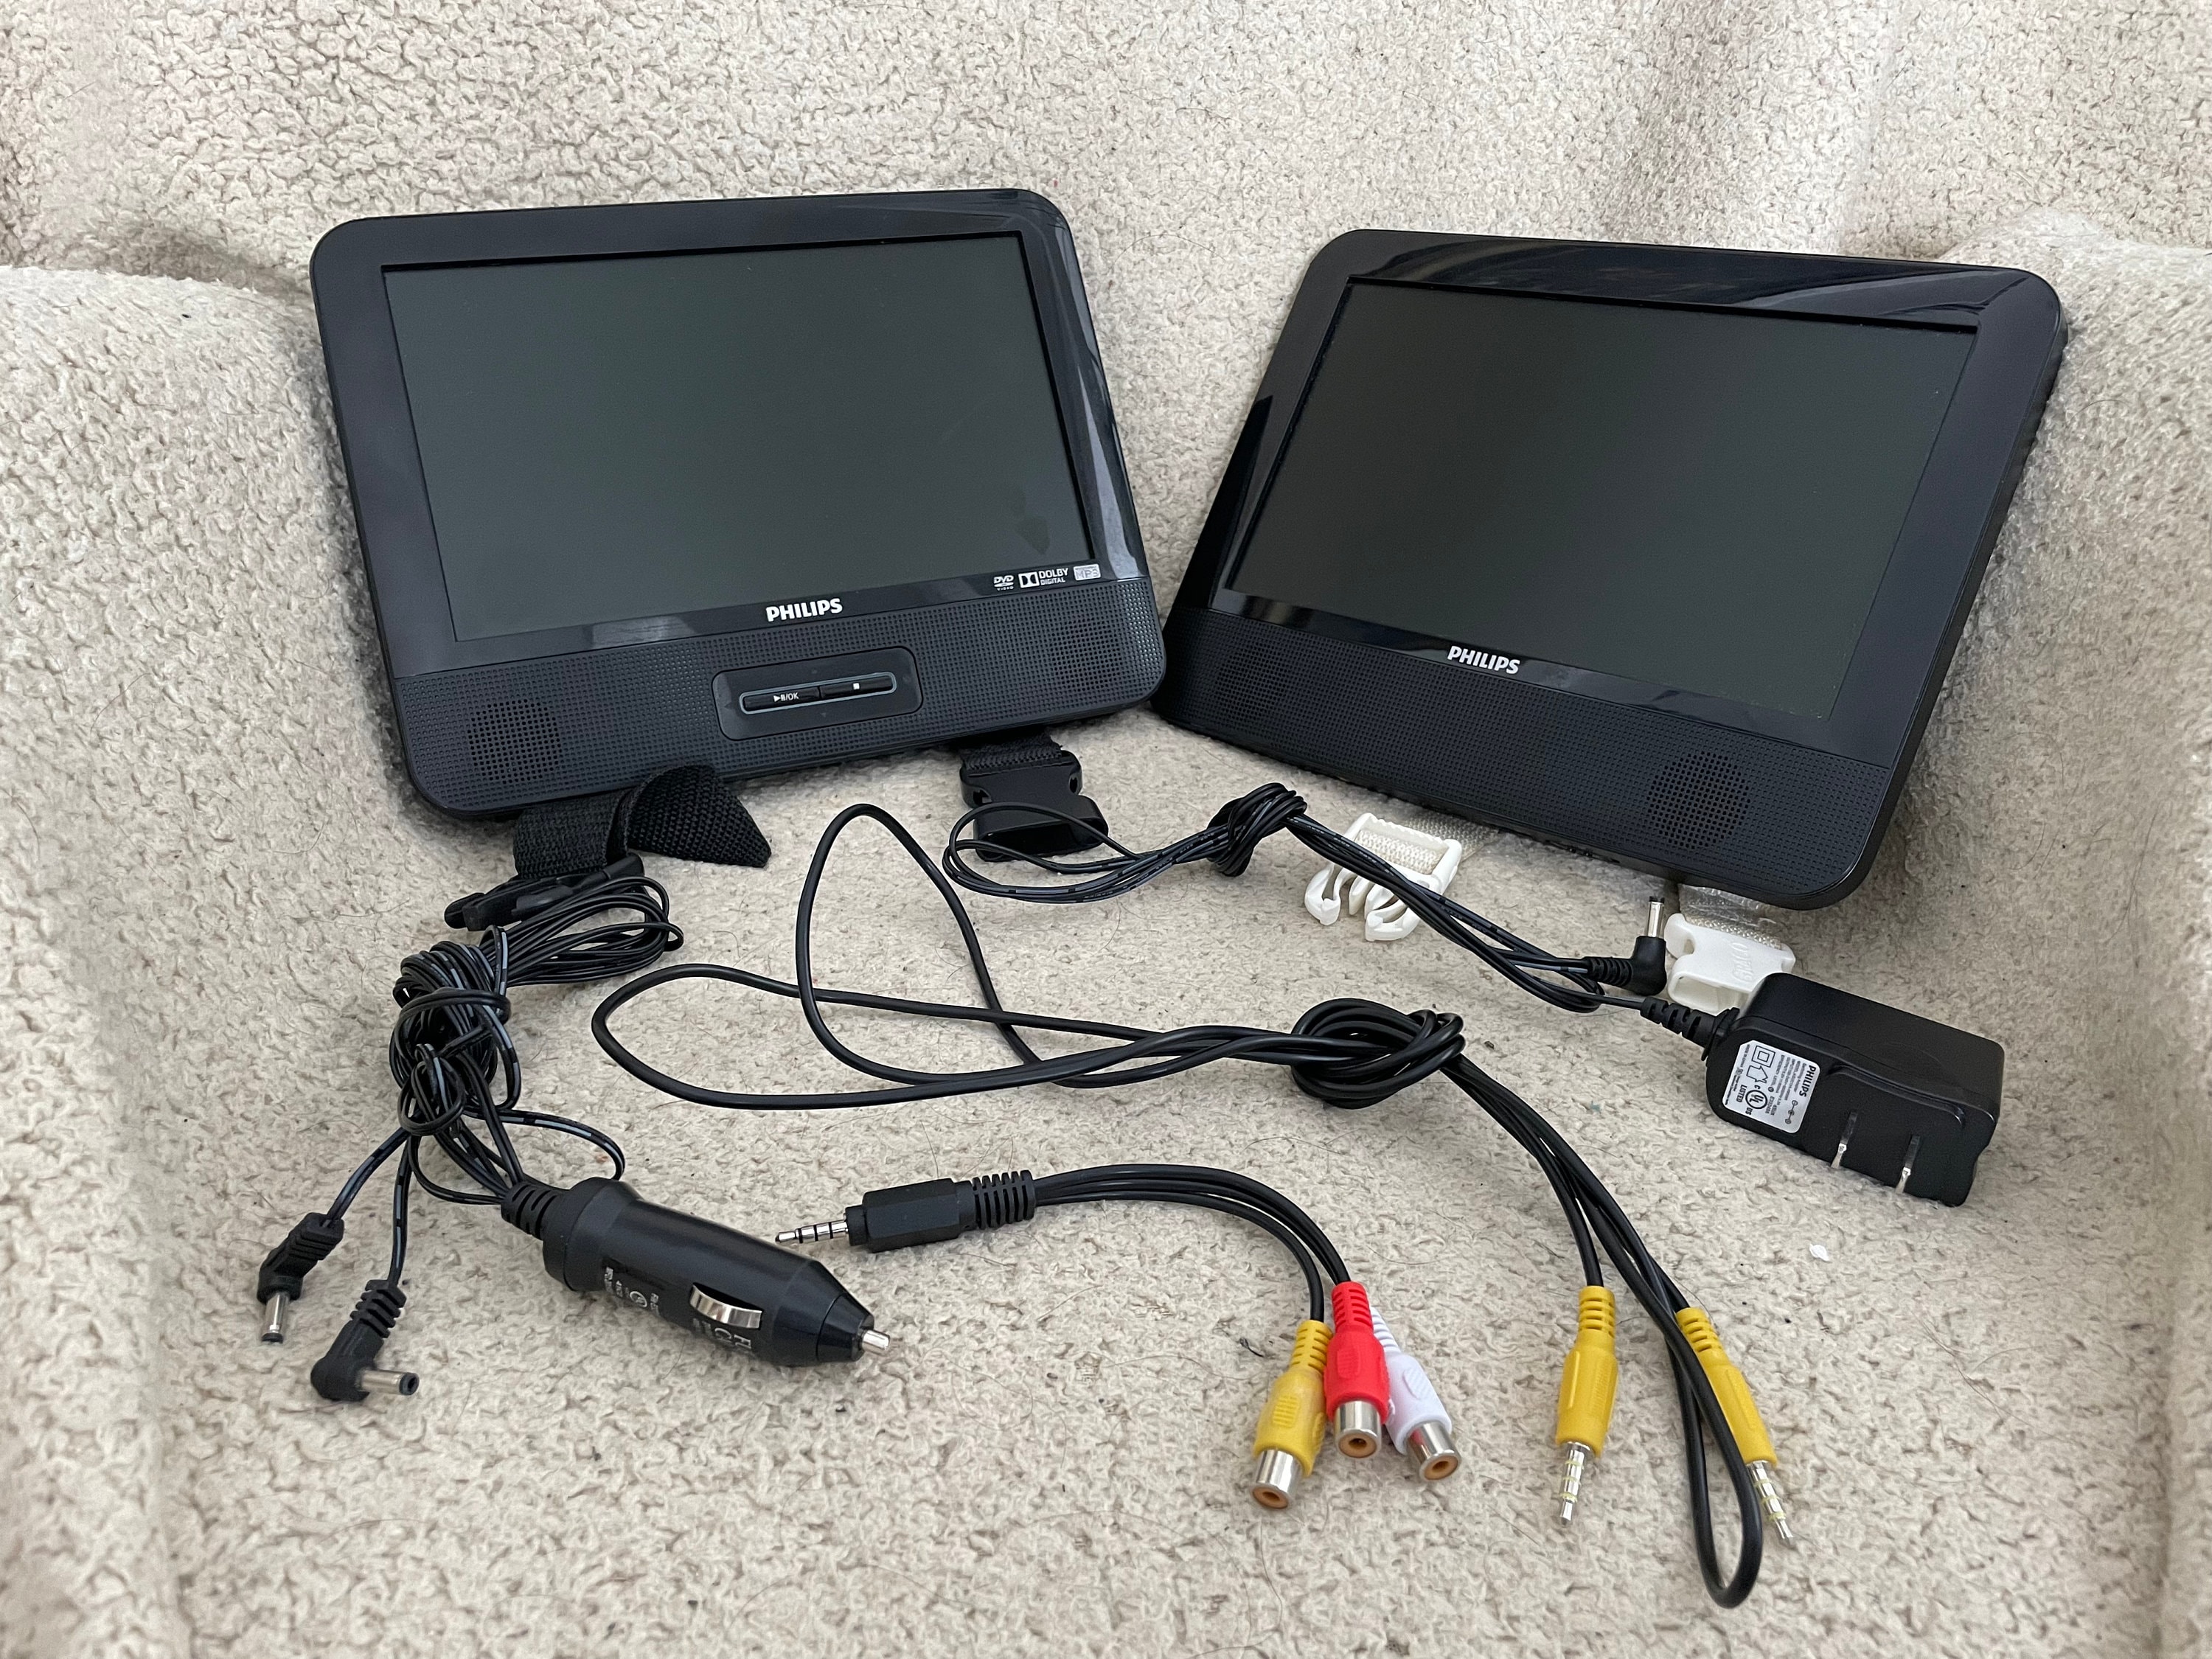 Philips Dual Screen Portable DVD Player - Etsy